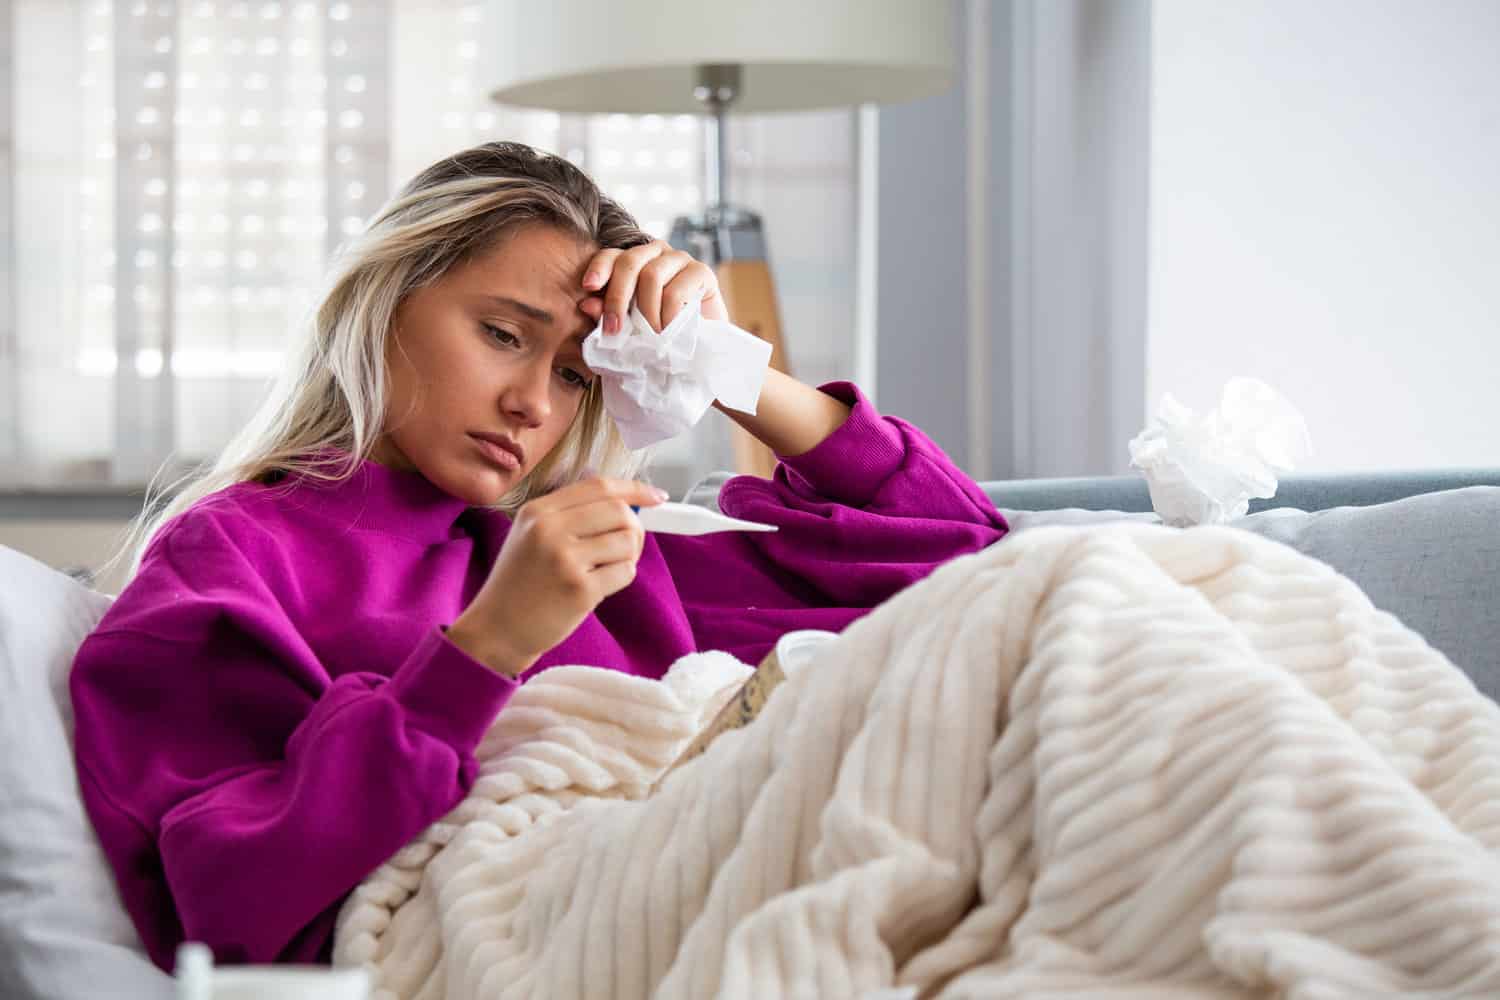 Common Cold vs the Flu: Signs and Symptoms